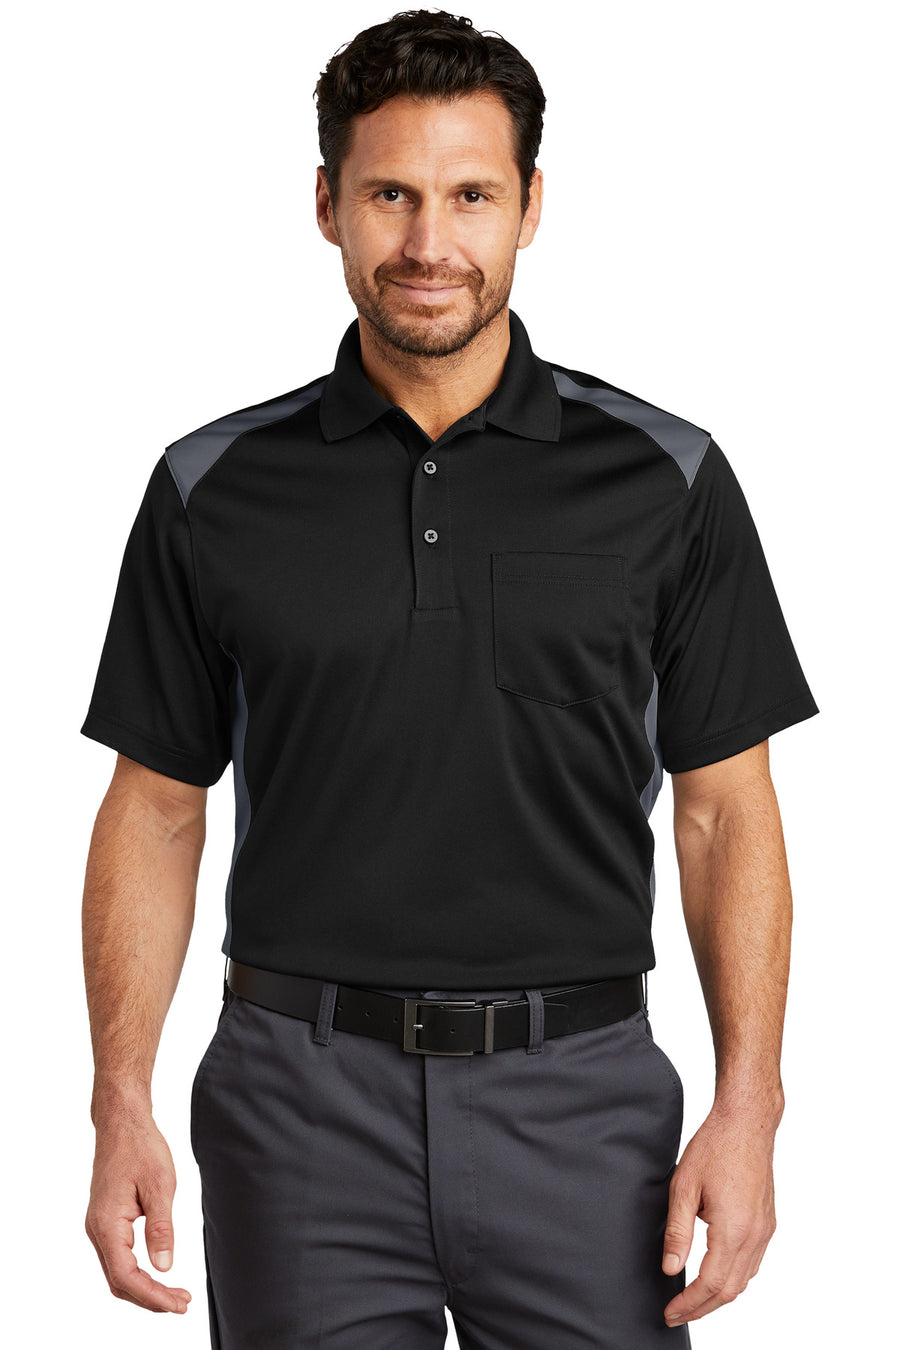 CornerStone Select Snag-Proof Two Way Colorblock Pocket Polo.